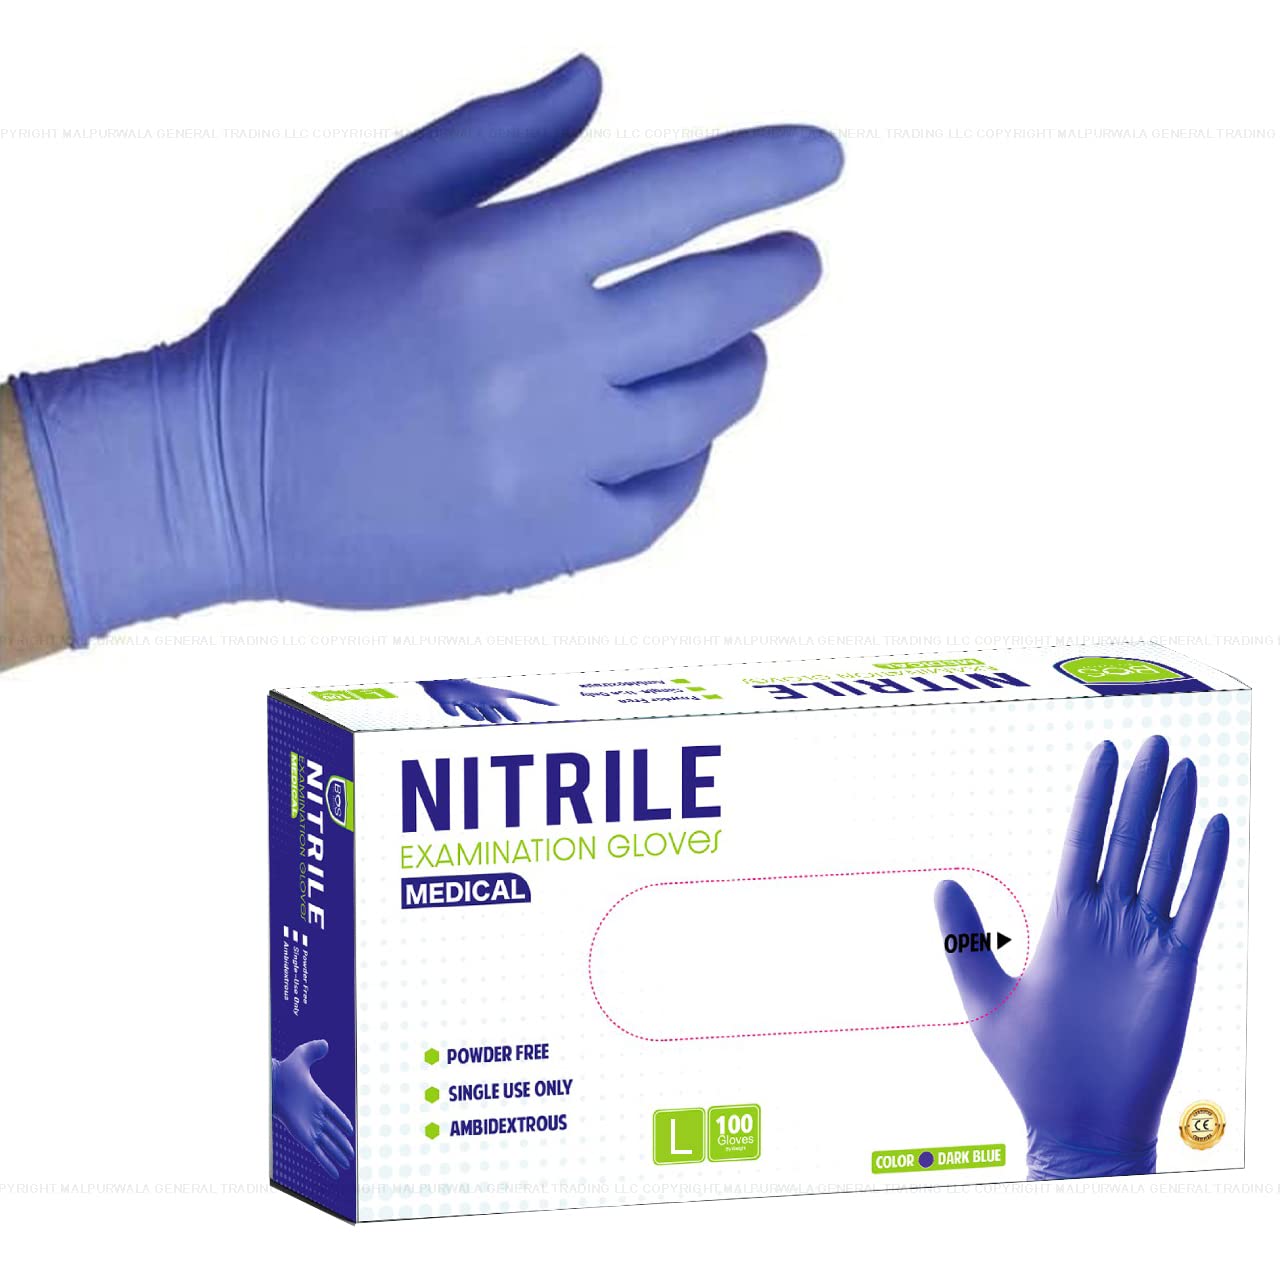 Bio Safety (BOS) Nitrile Examination Gloves, Pack of 100 Gloves - Premium quality Powder Free, Ambidextrous, Non-Sterile, Disposable, Food Safe, Dark Blue Color